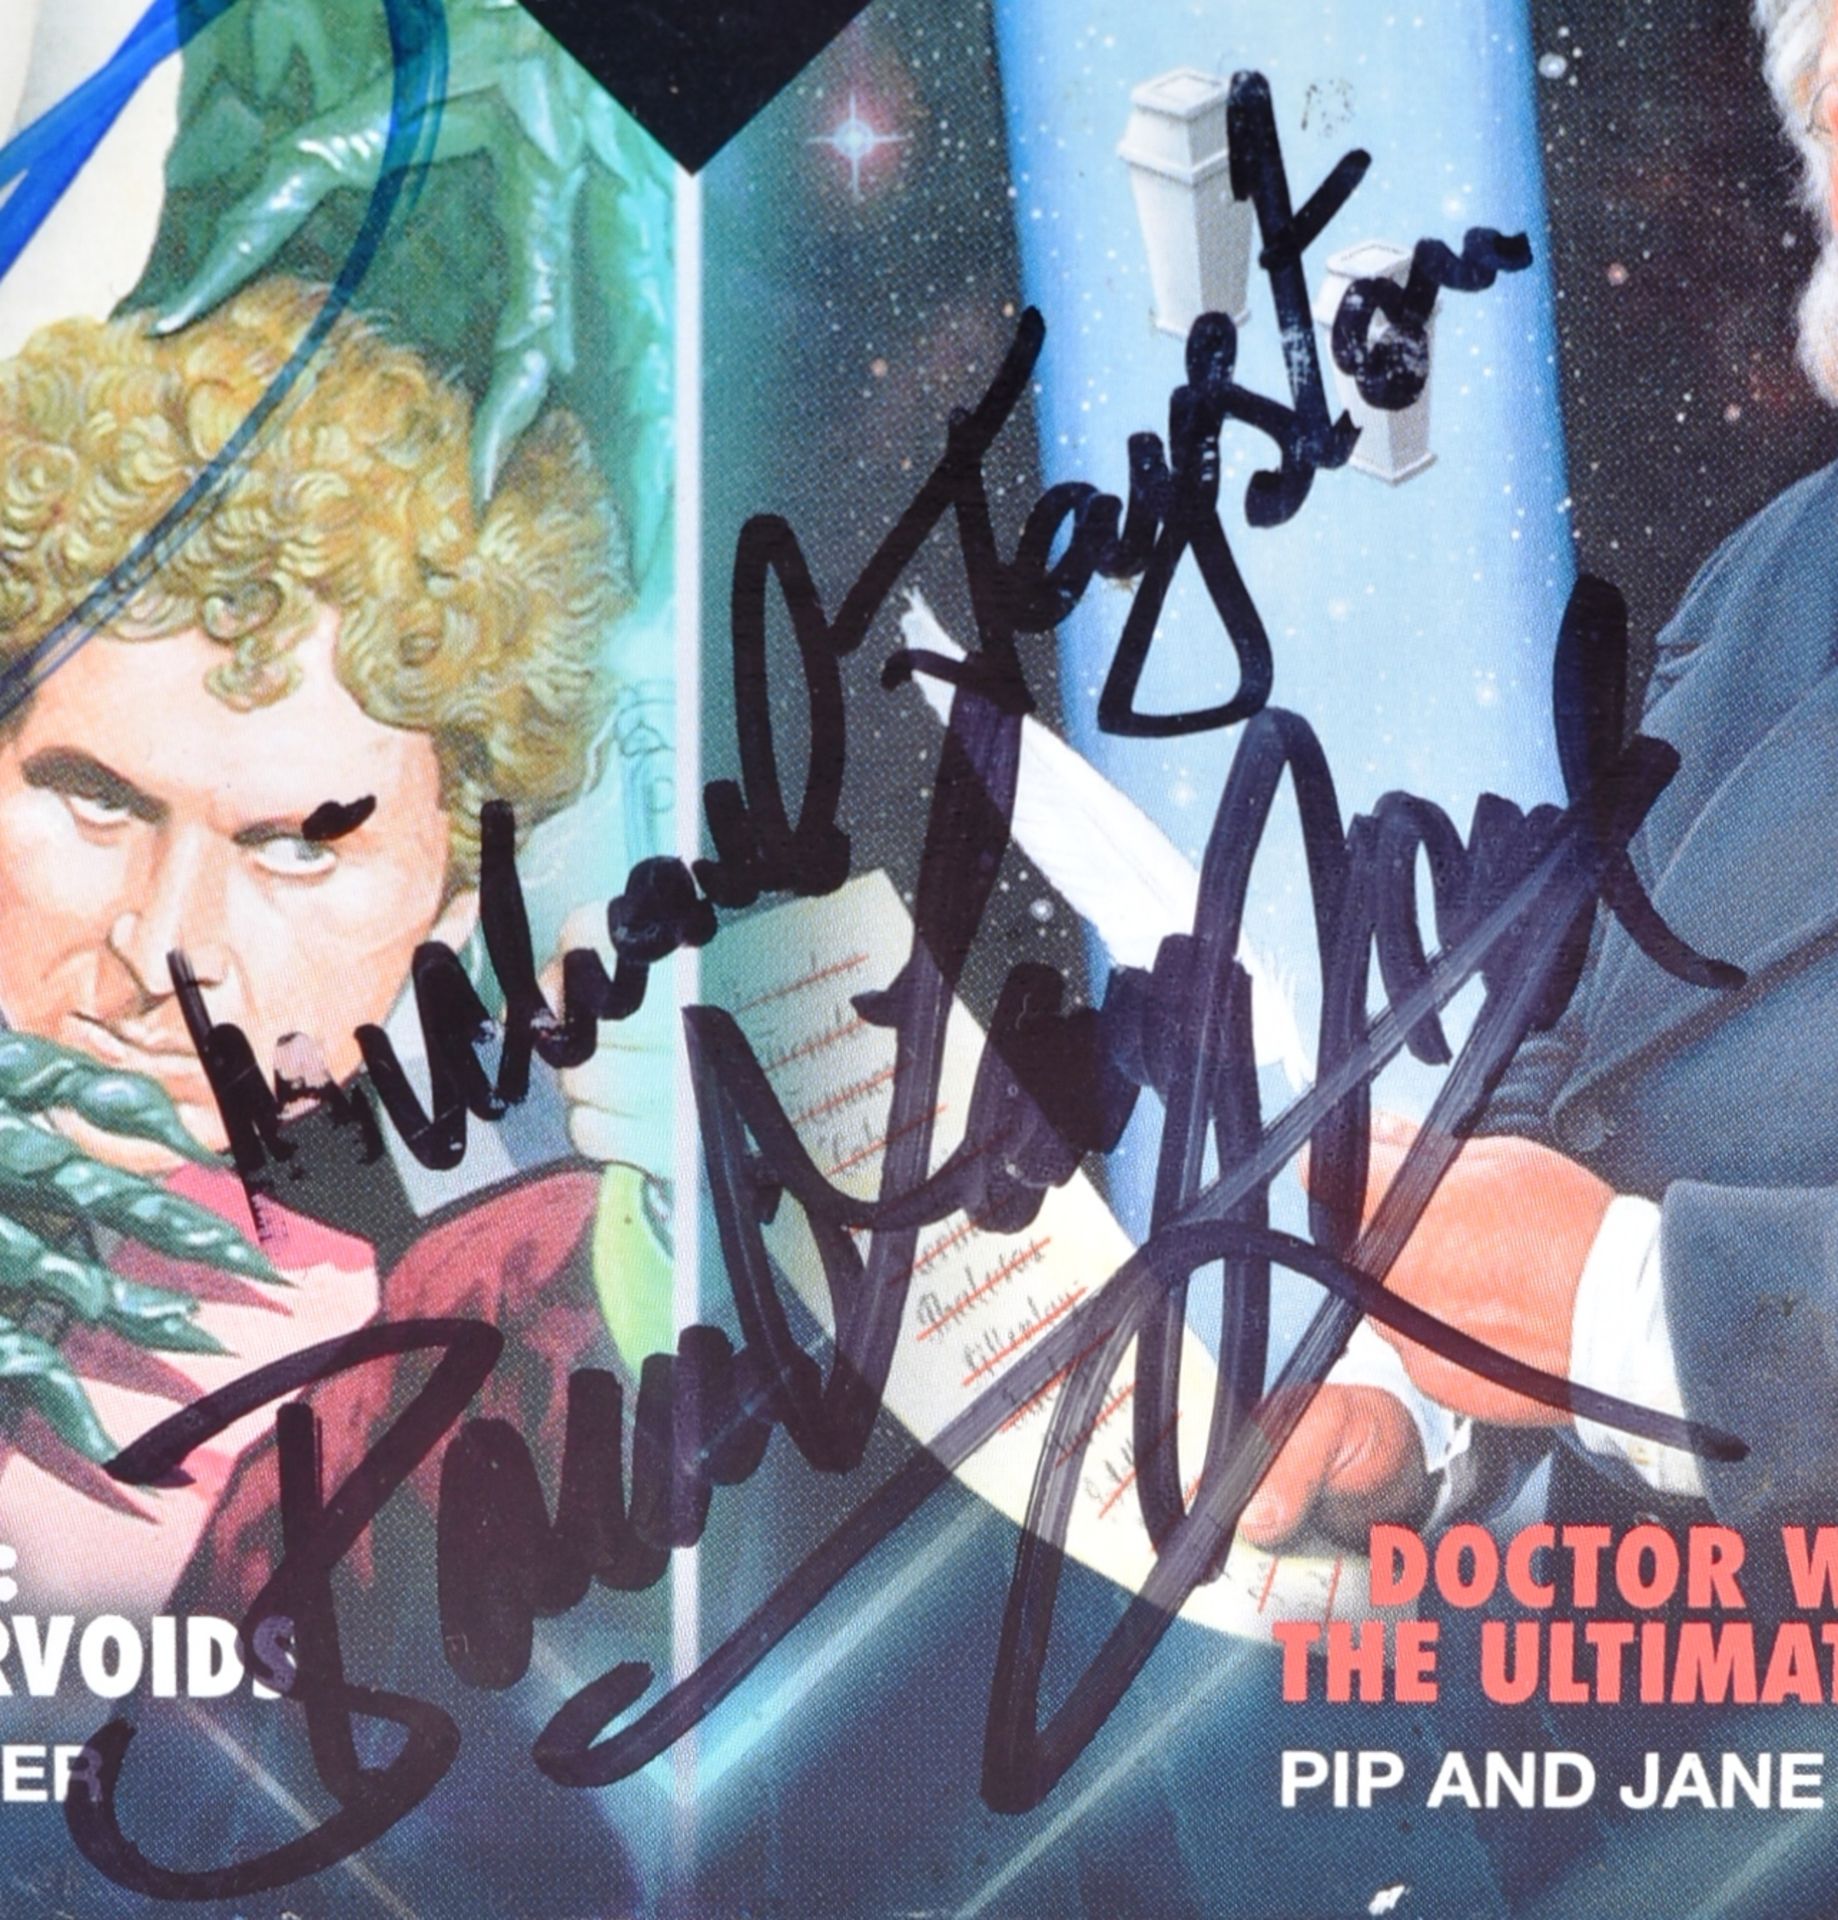 DOCTOR WHO SIGNED CD BOXED SET - Image 3 of 4